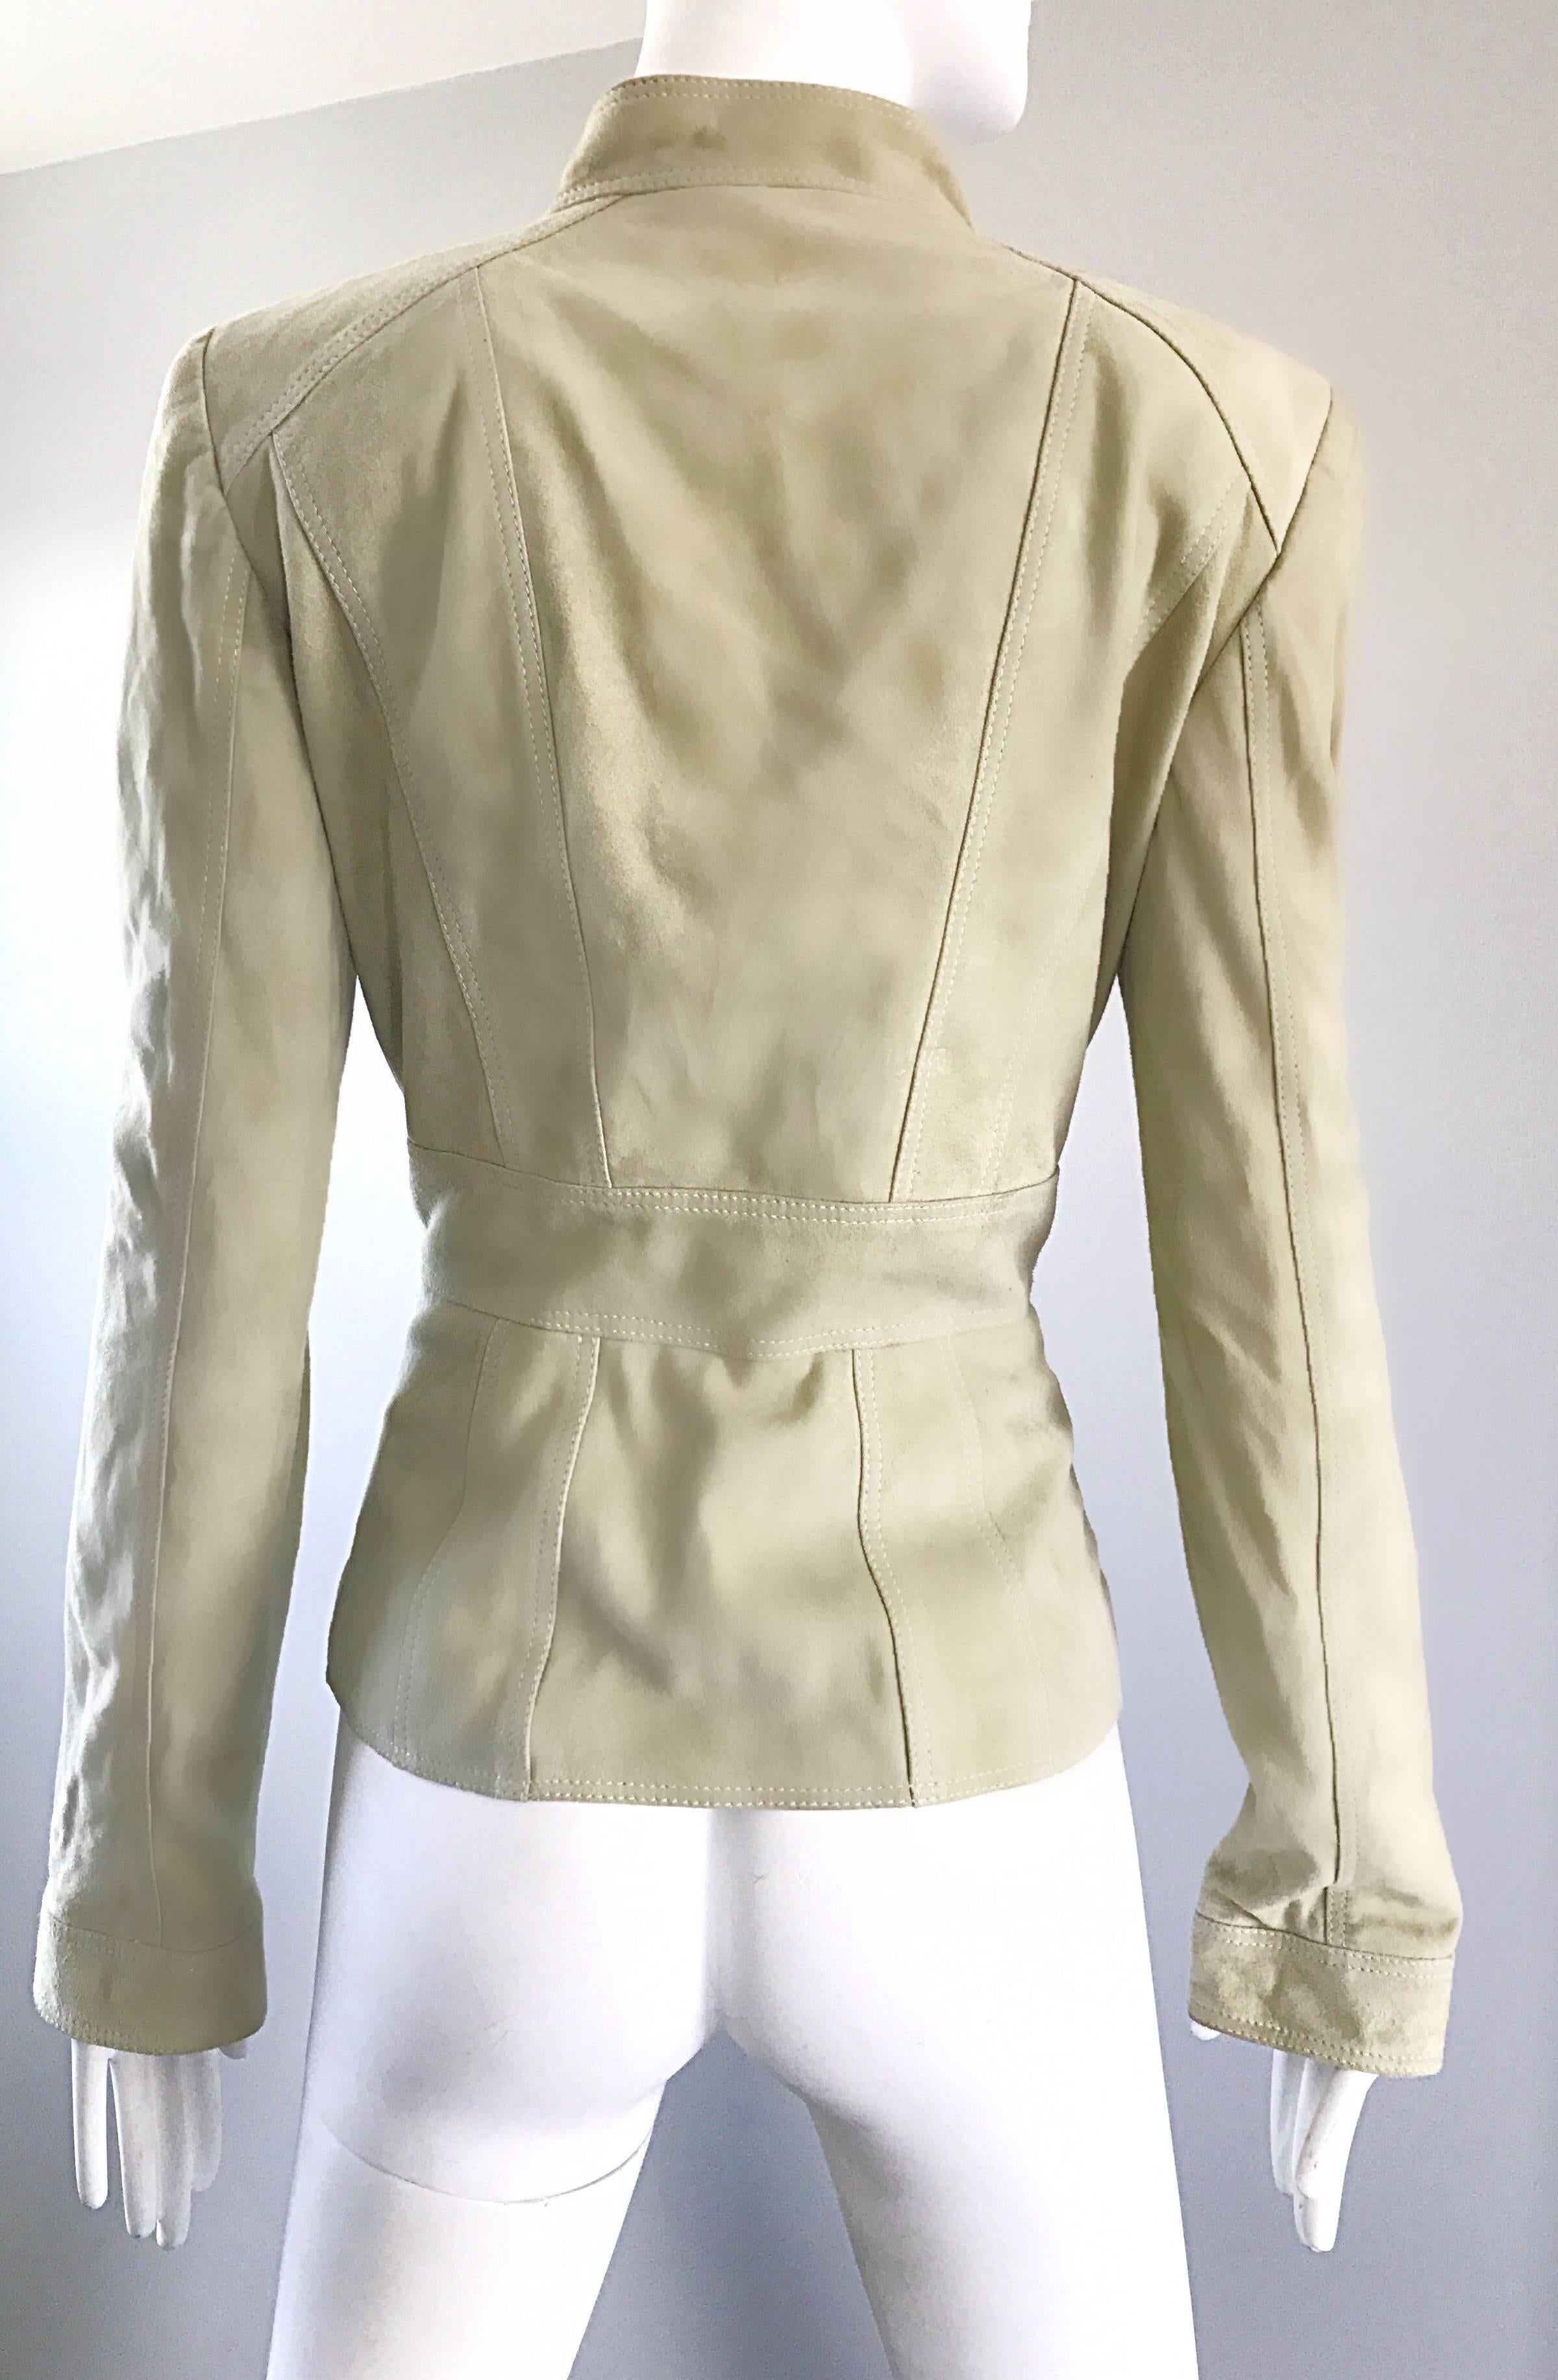 Tom Ford for Gucci Pistachio Khaki Suede Leather 1990s Vintage Ruffle ...